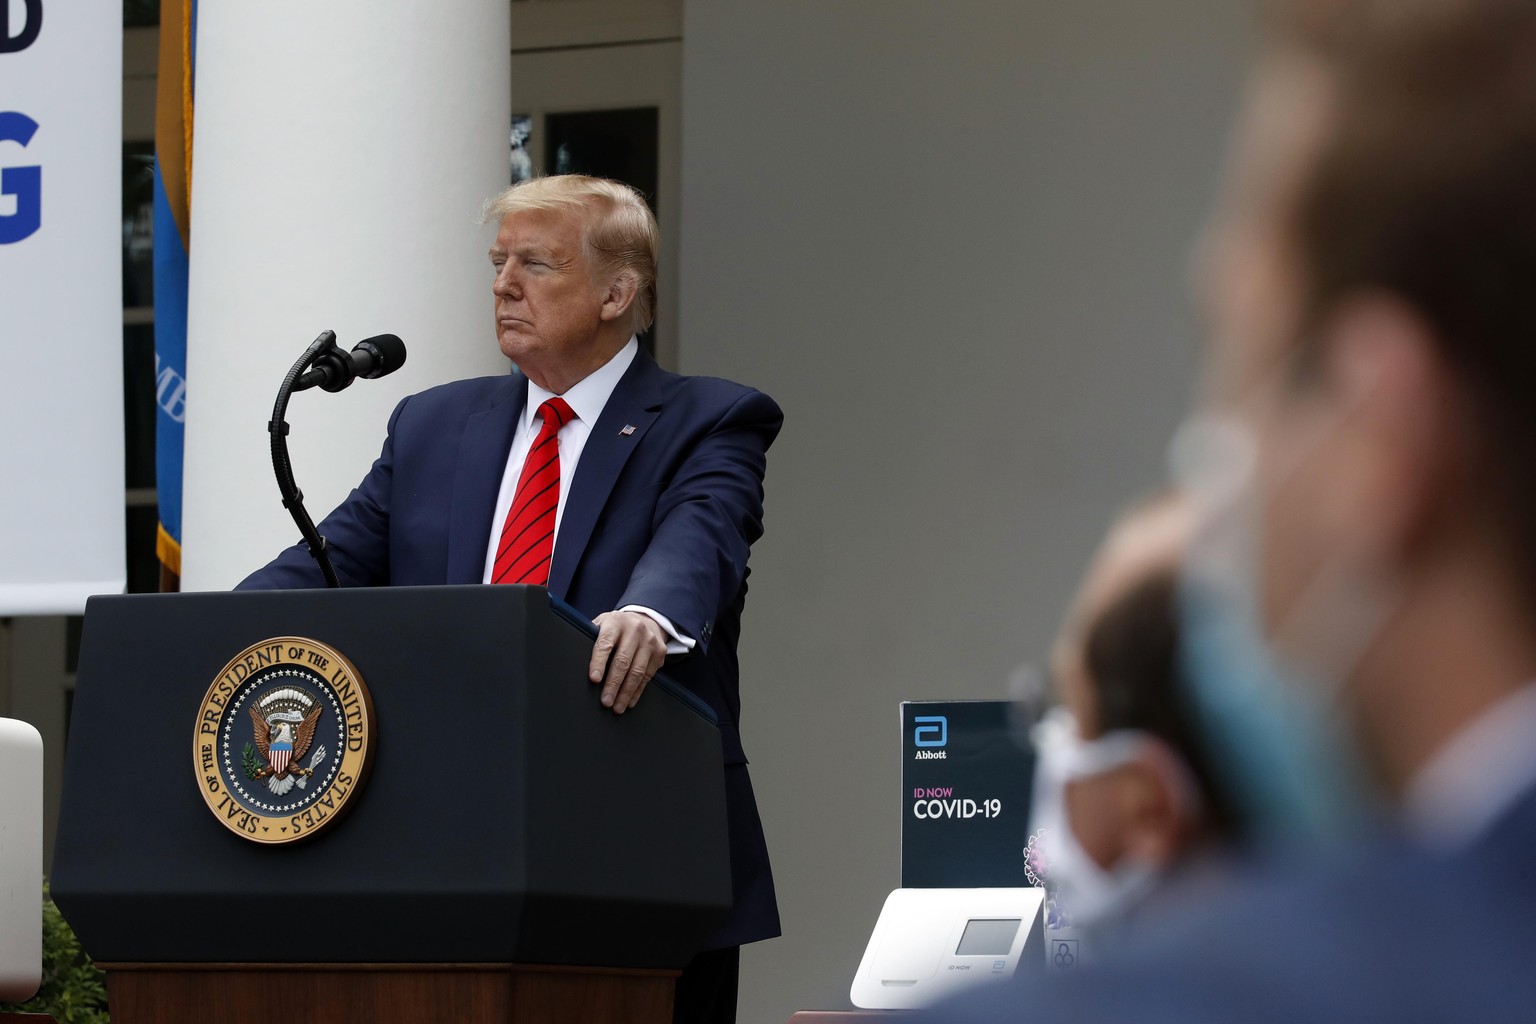 President Donald Trump speaks about the coronavirus during a press briefing in the Rose Garden of the White House, Monday, May 11, 2020, in Washington. (AP Photo/Alex Brandon) |